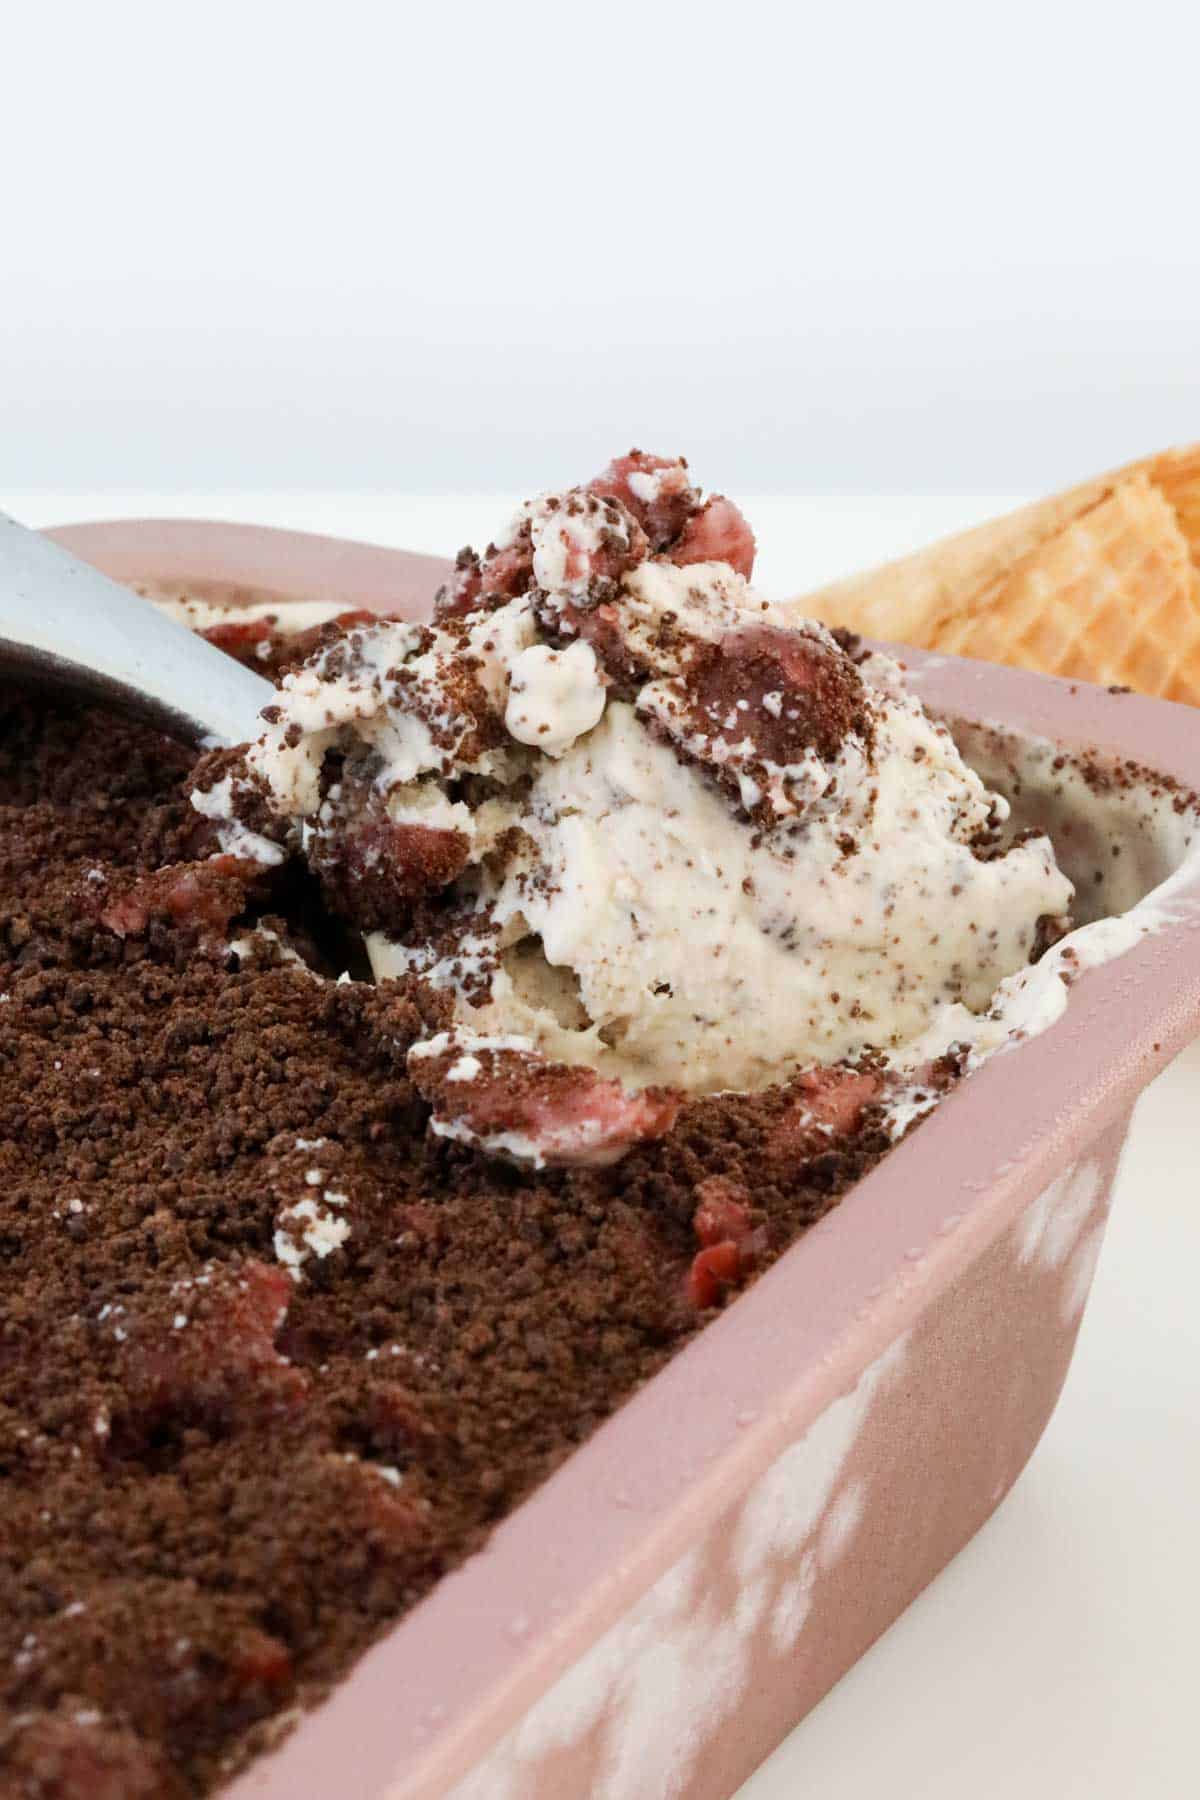 A spoon being dug into a loaf tin filled with chocolate and cherry ice cream.